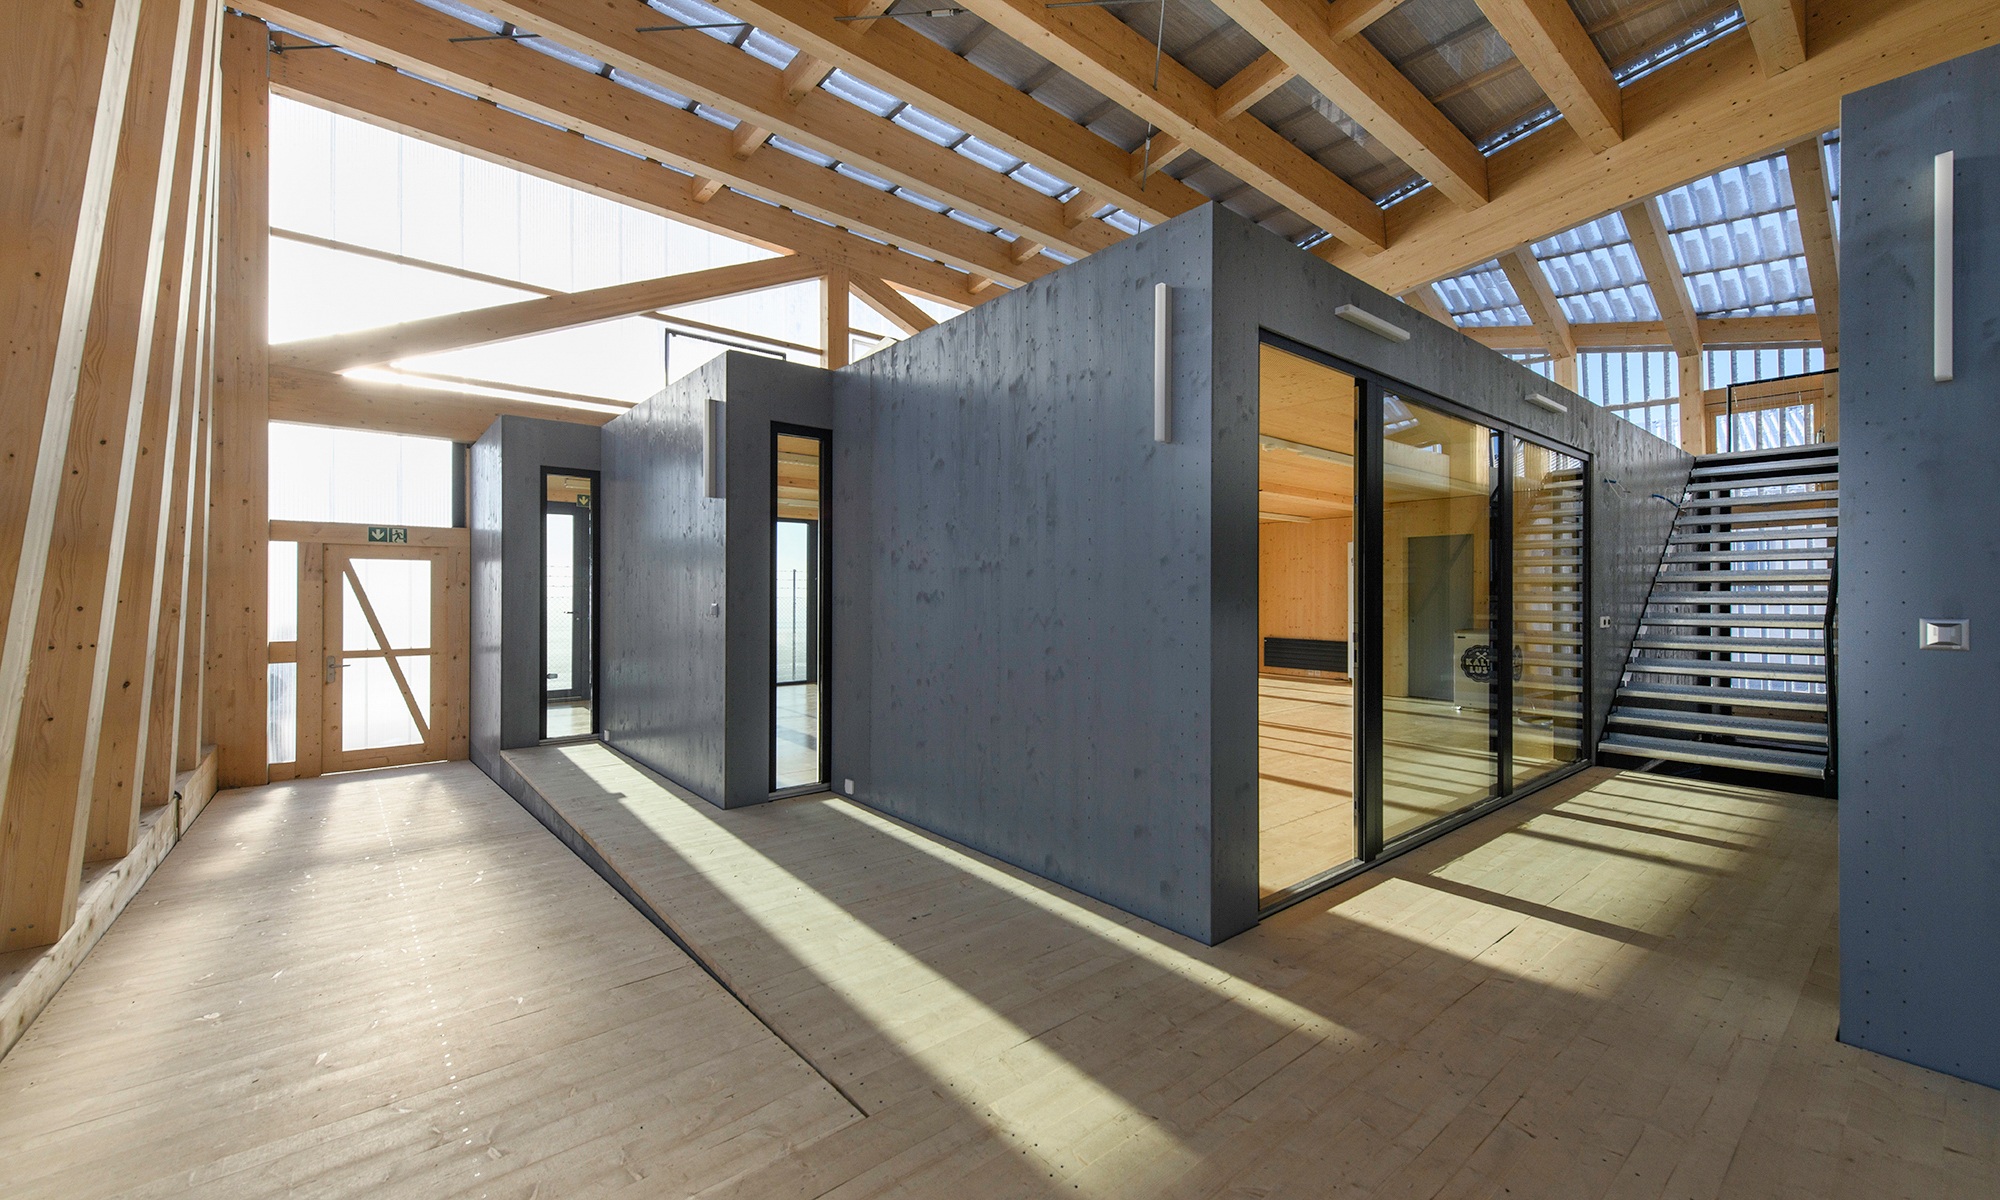 Room-sized timber modules define spatial units in a timber hall.